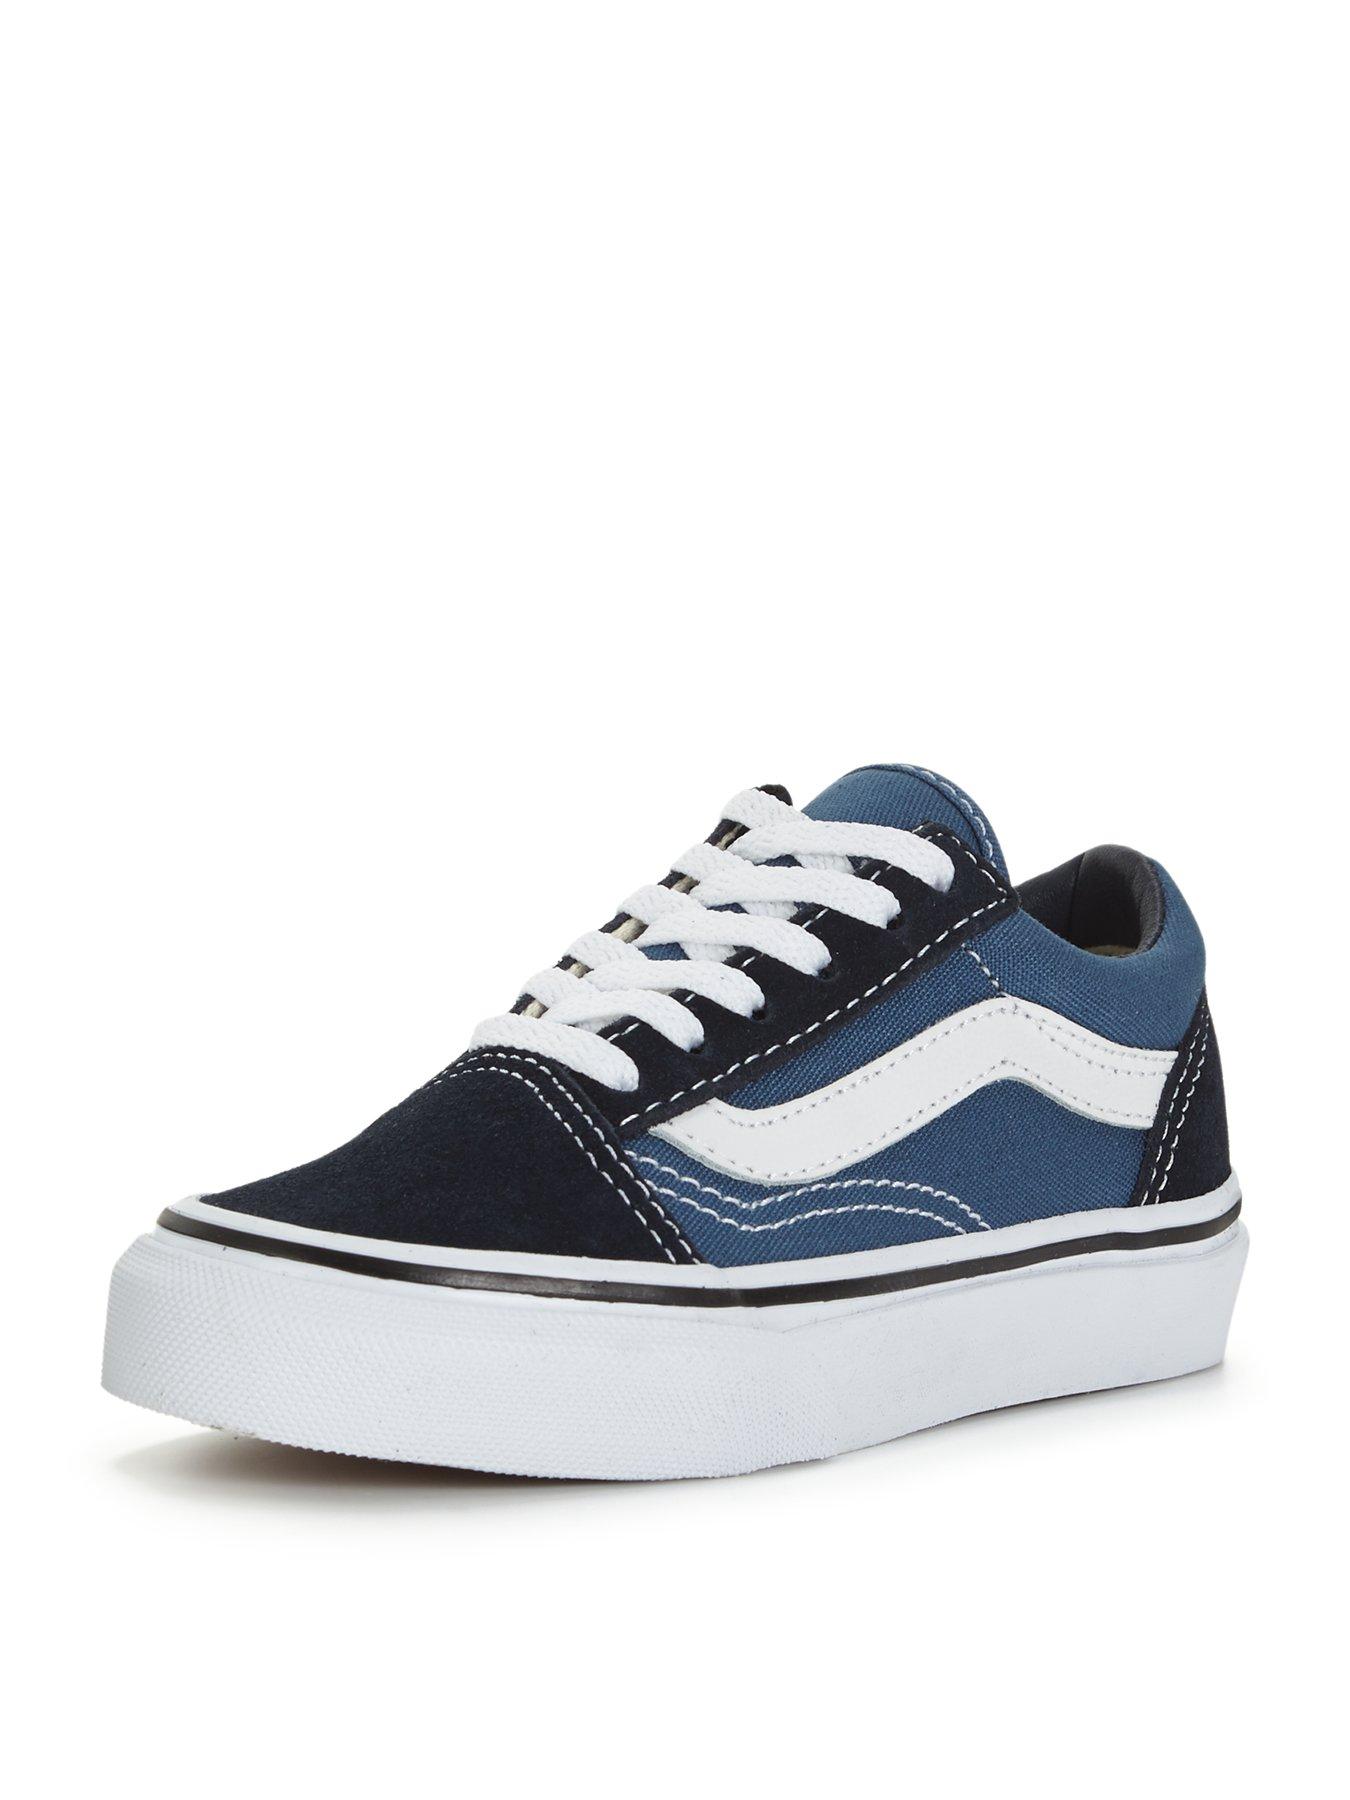 vans shoes for girls black and blue